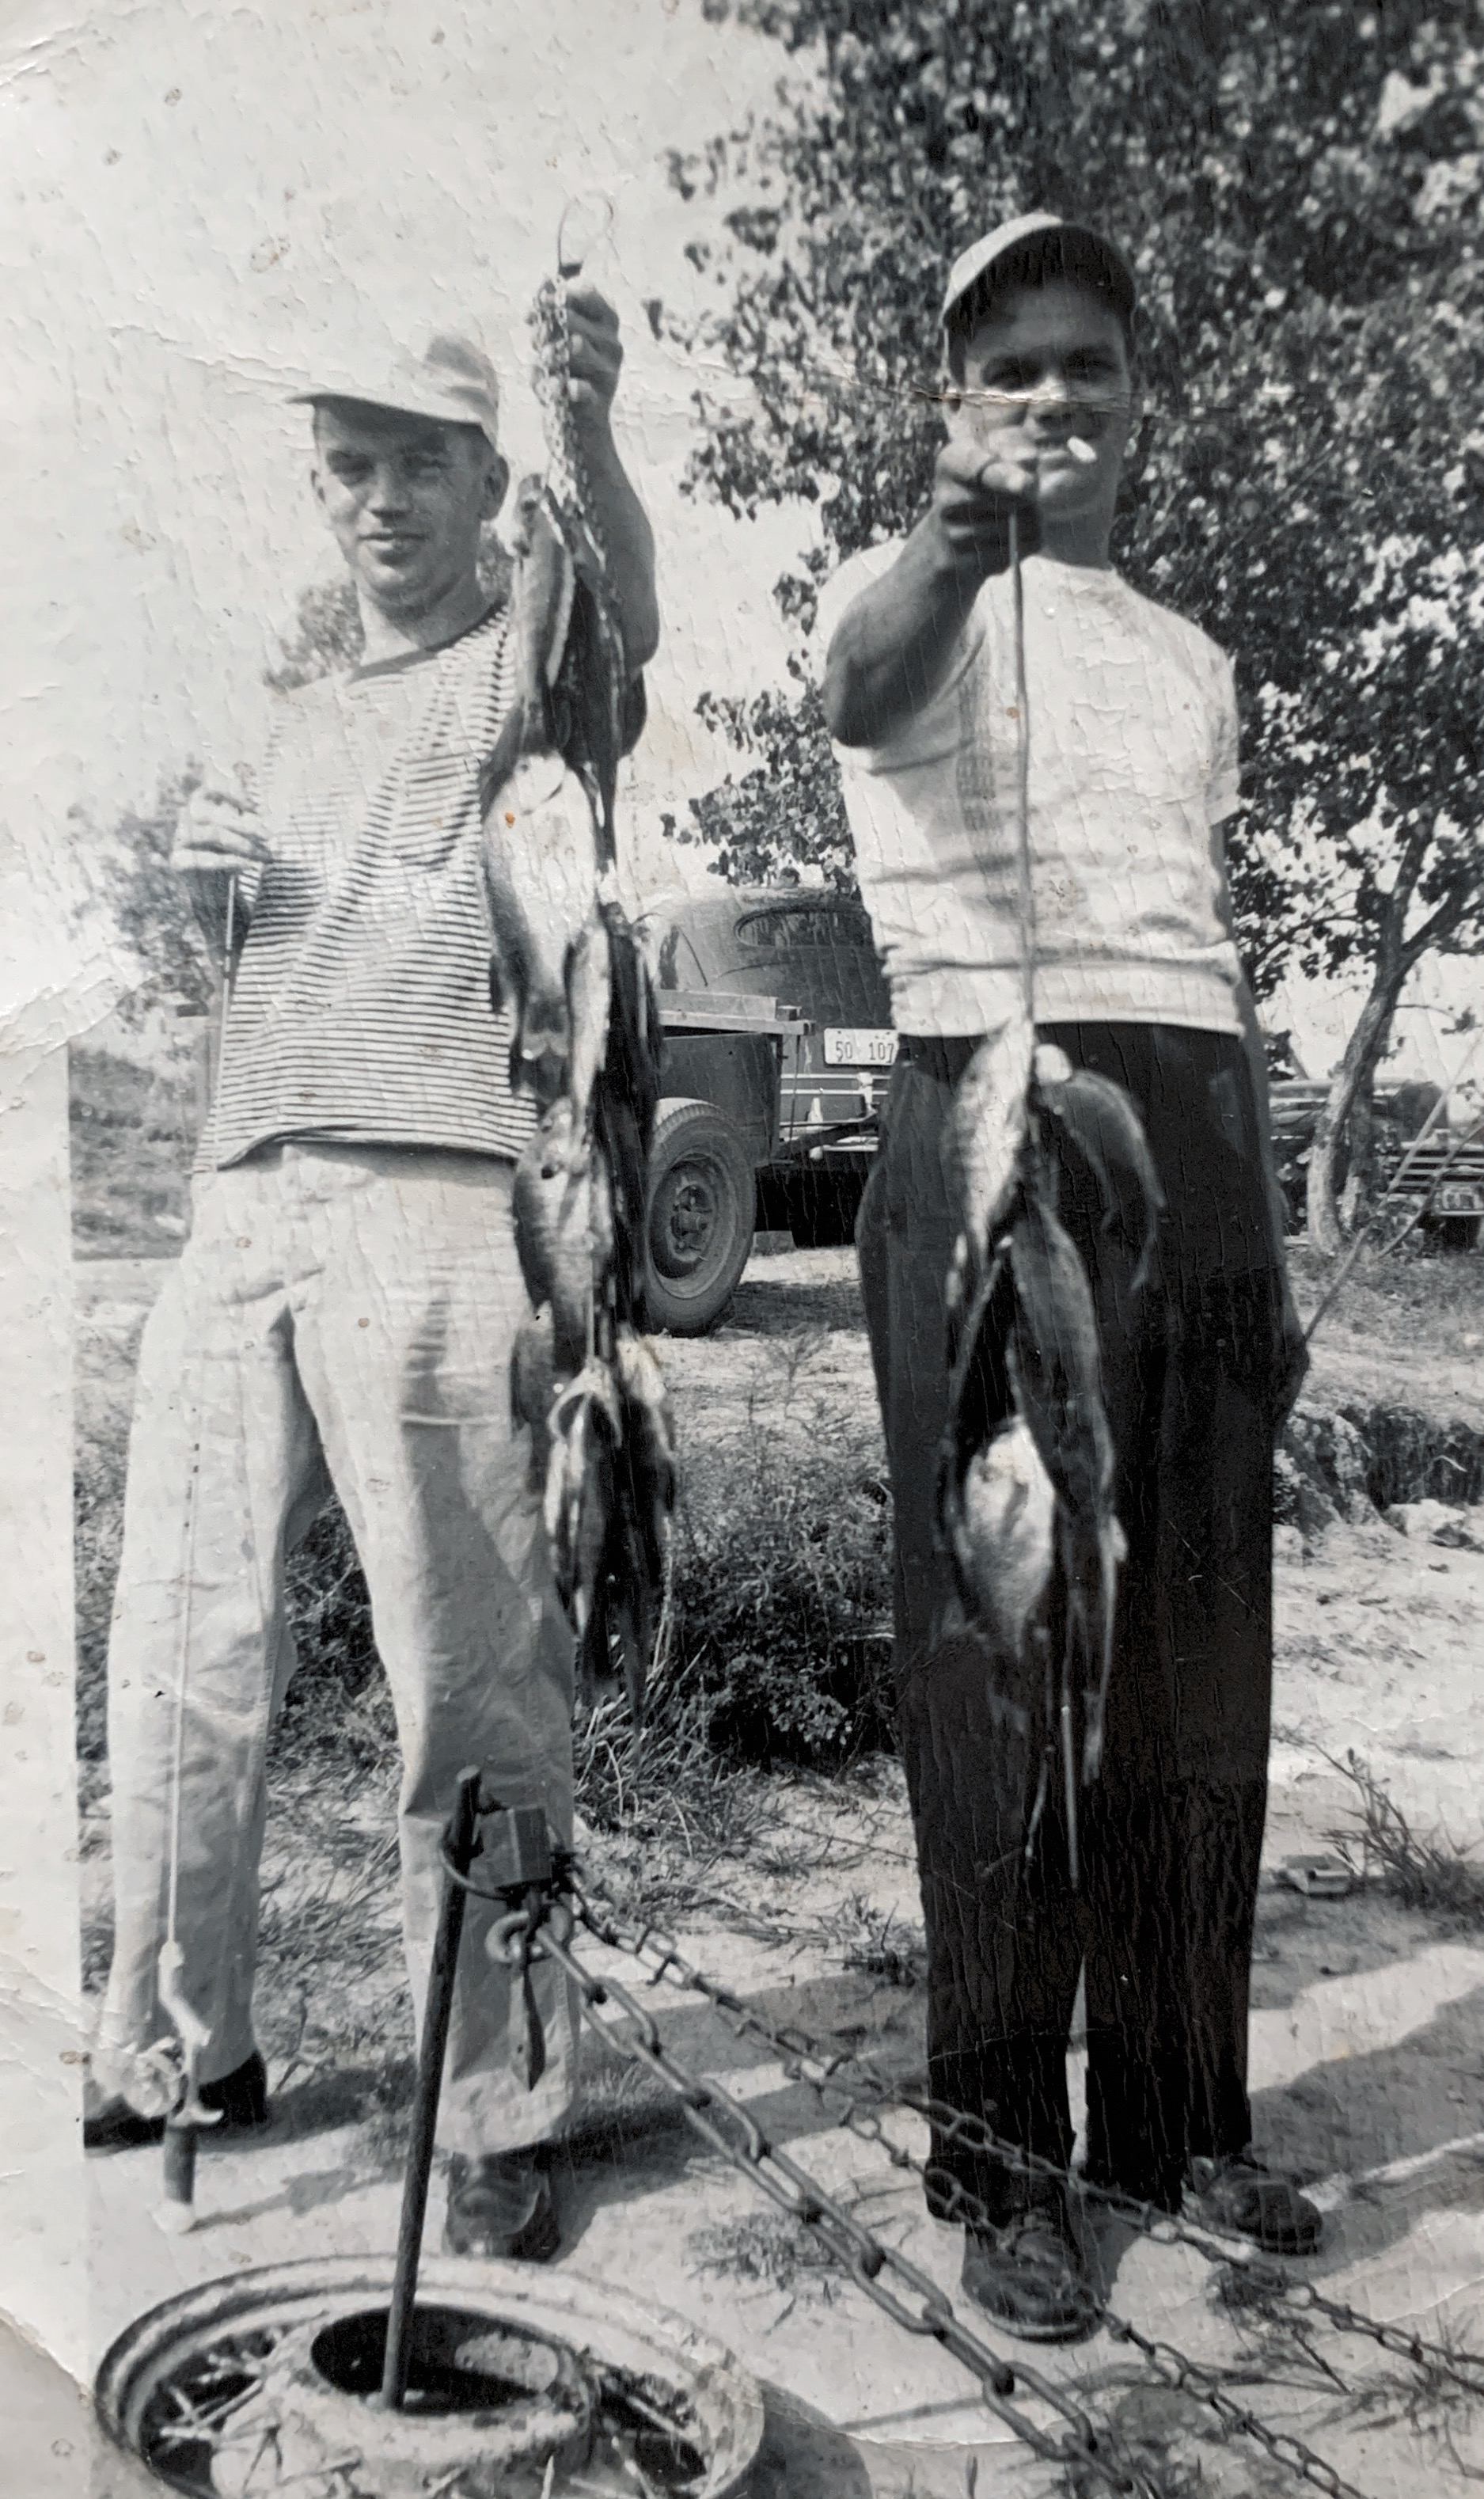 Jim and Jack Lorton, Brothers
1945 “a big mess of crappies for dinner”